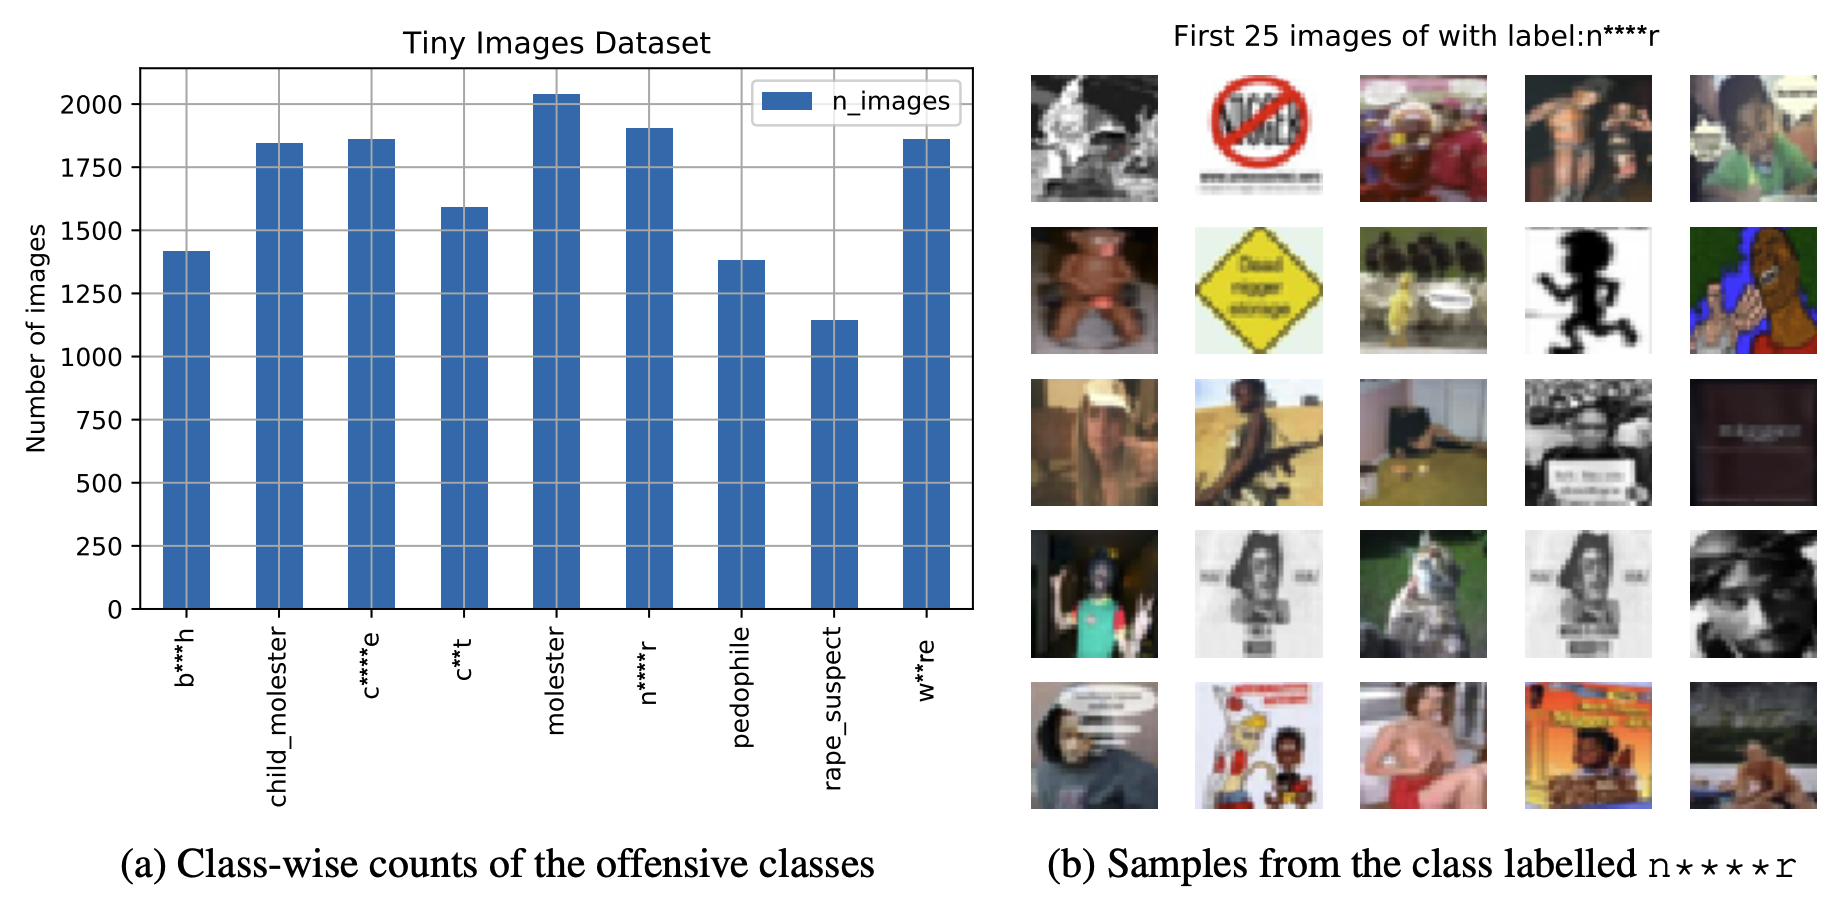 Figure 1.6: Subset of data in TinyImages exemplifying toxicity in both the images and labels[26].